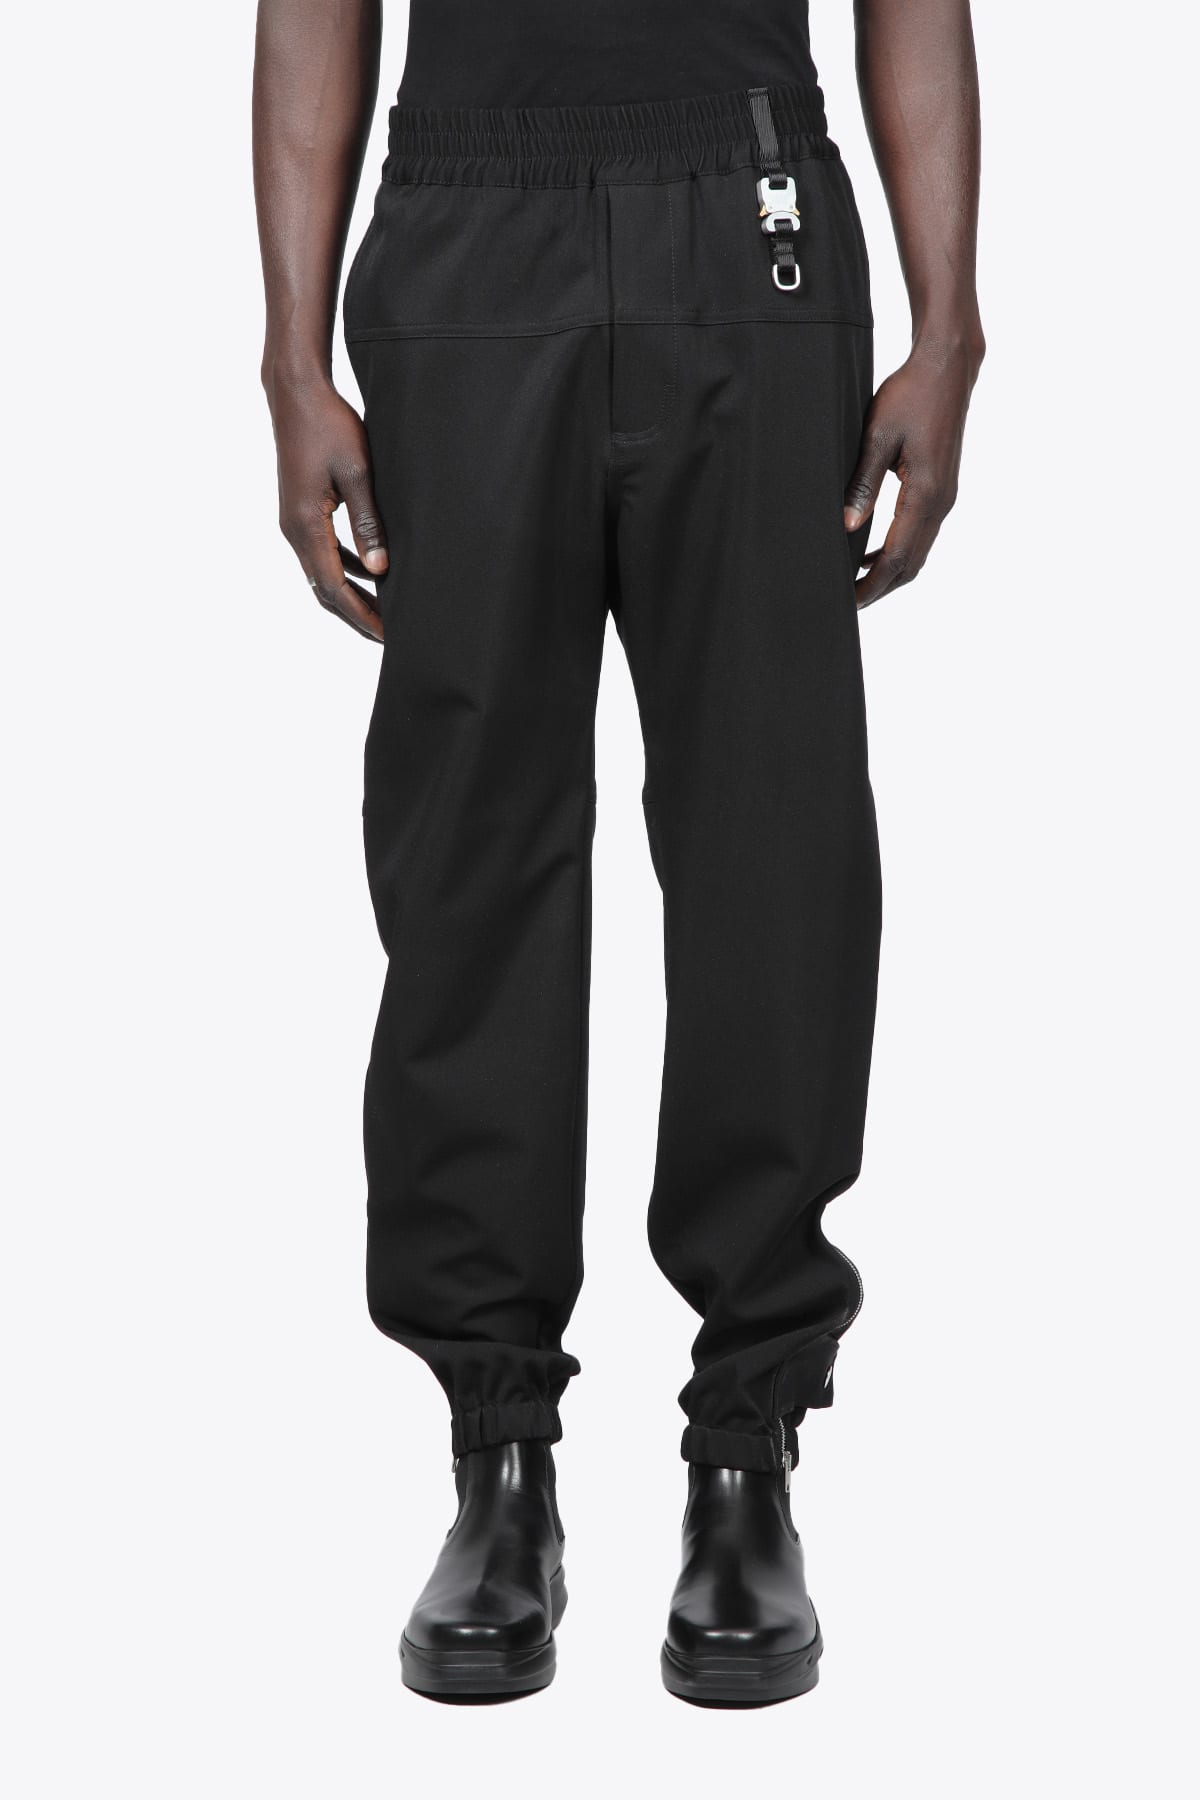 1017 ALYX 9SM Trackpant - 2 Black acetate trousers with ankle zip - Trackpant